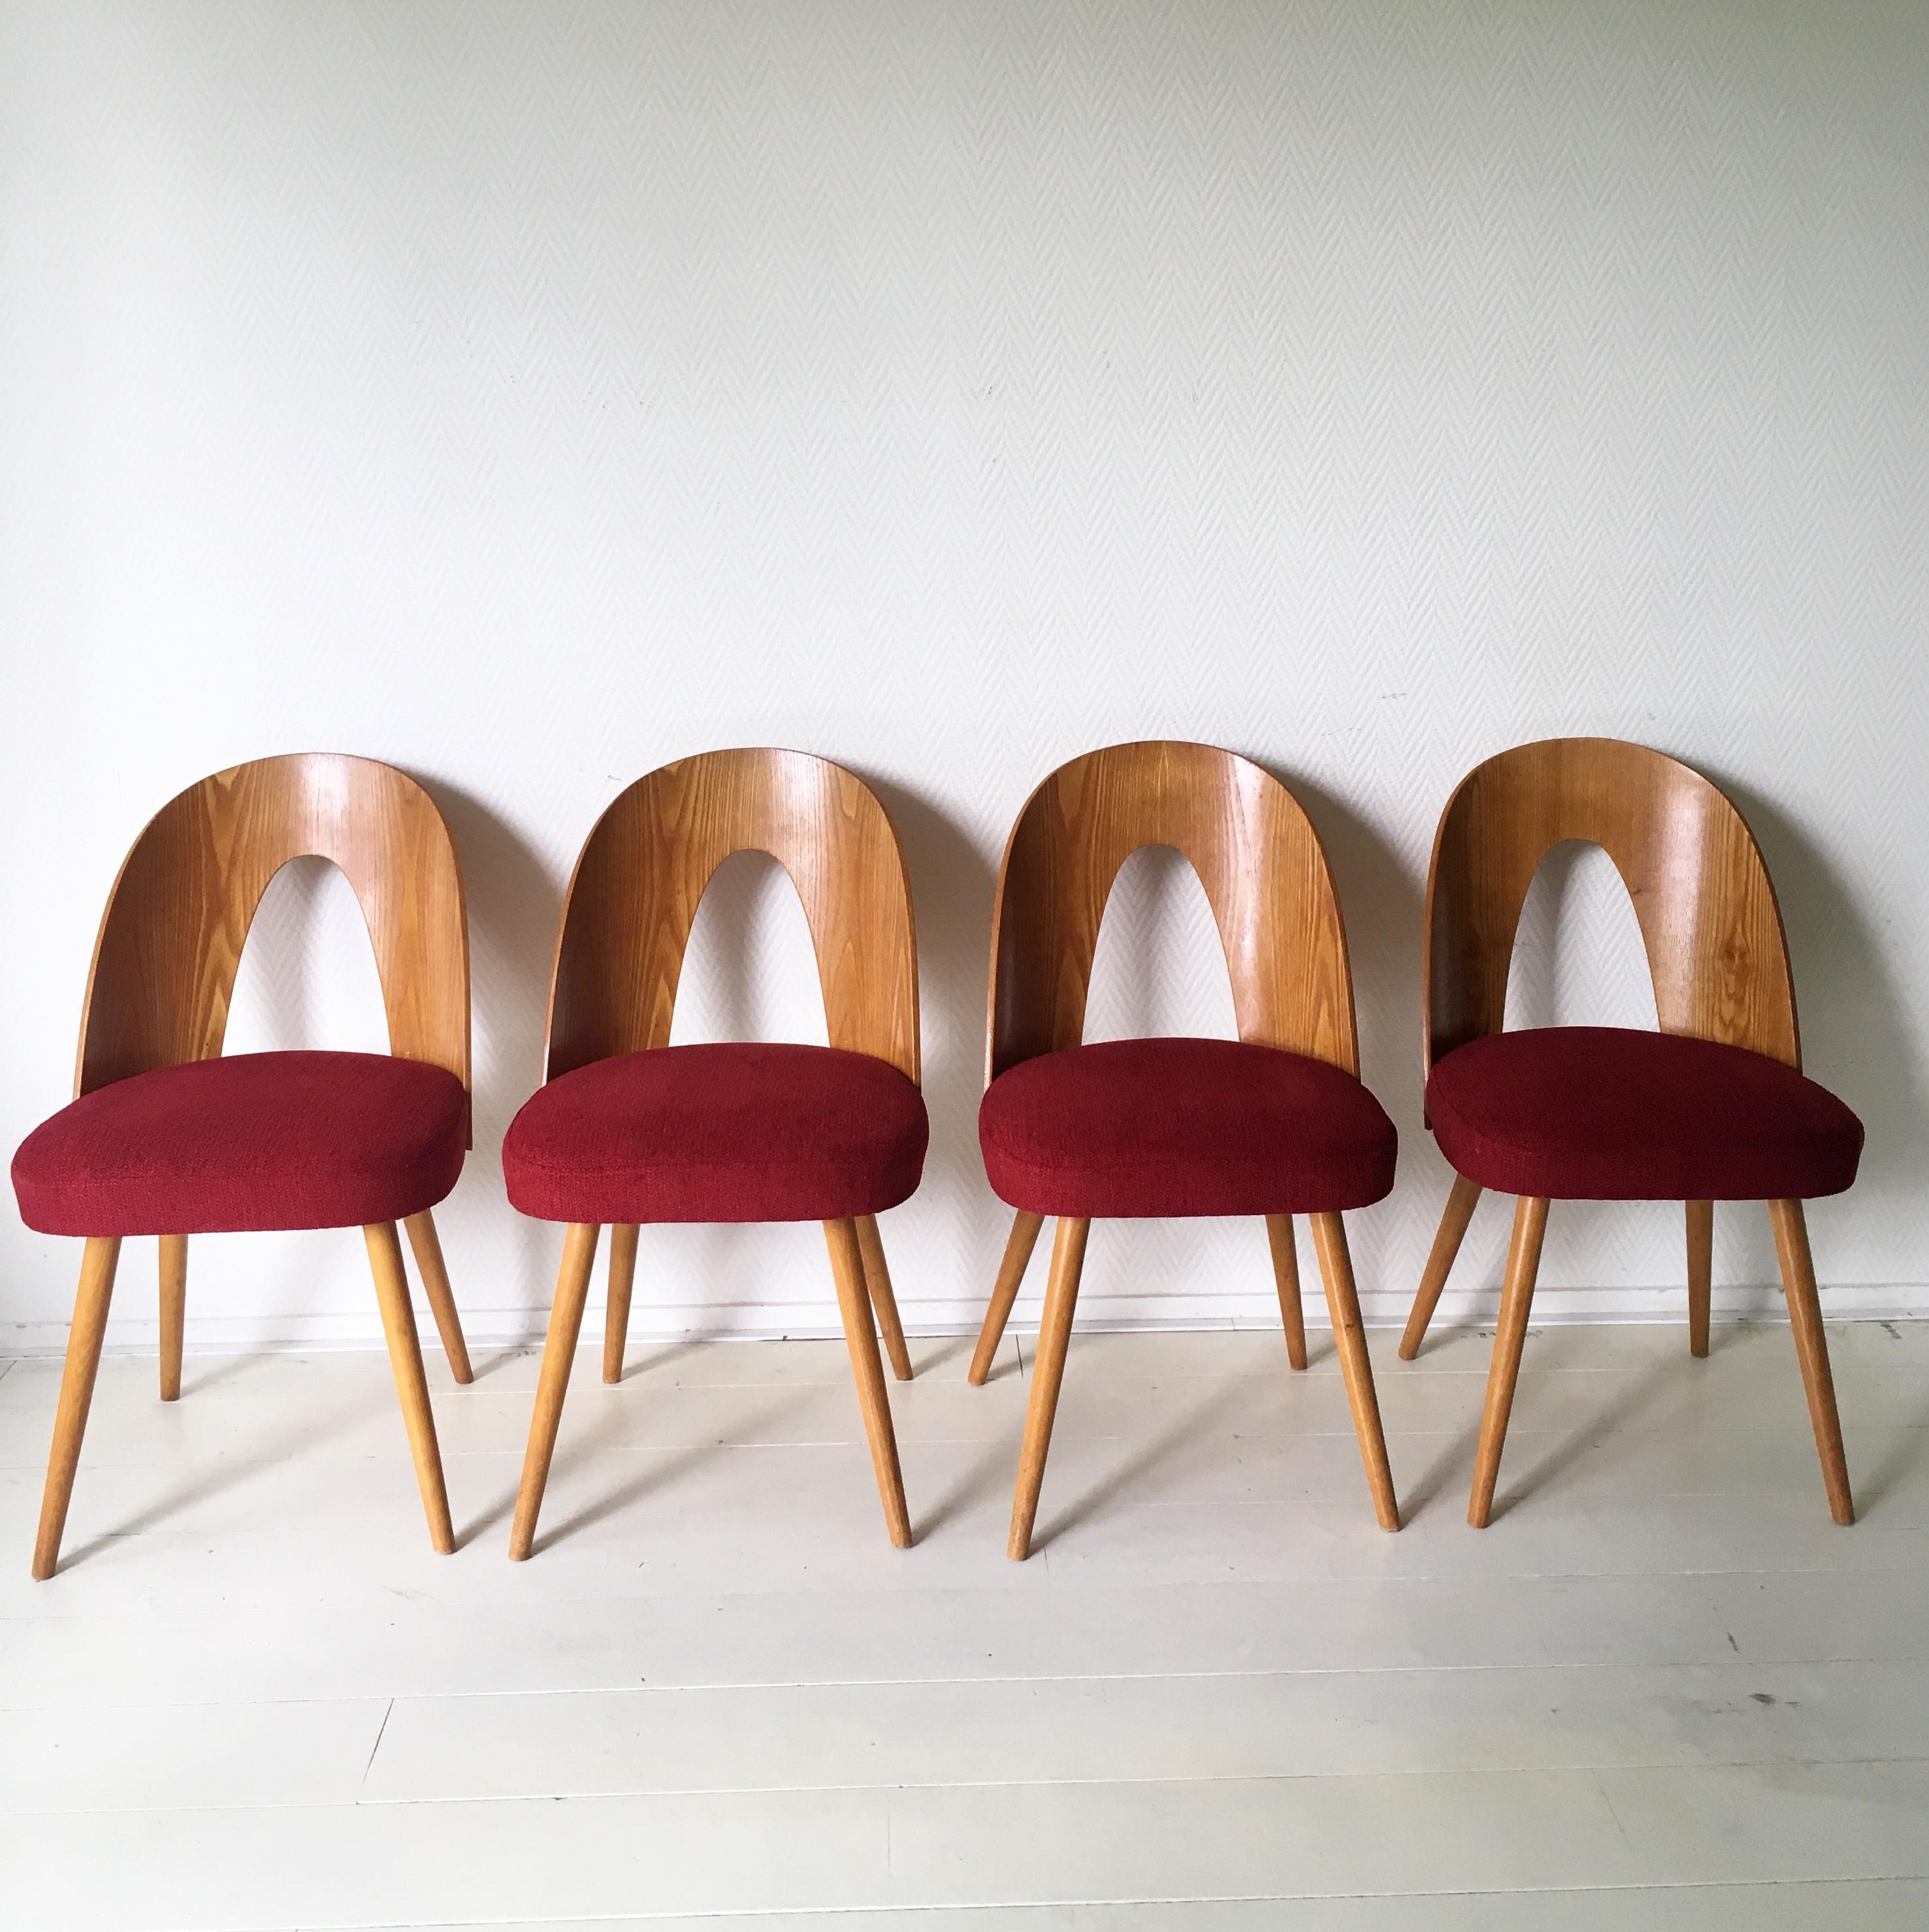 Stylish Czechoslvakian set of four wonderful Dining Room Chairs which were designed by Antonin Suman for Tatra Nabytok ca. the 1950’s. The chairs are as new while they have been re-upholstered with a classy Red Velvet like fabric. Only minimal signs